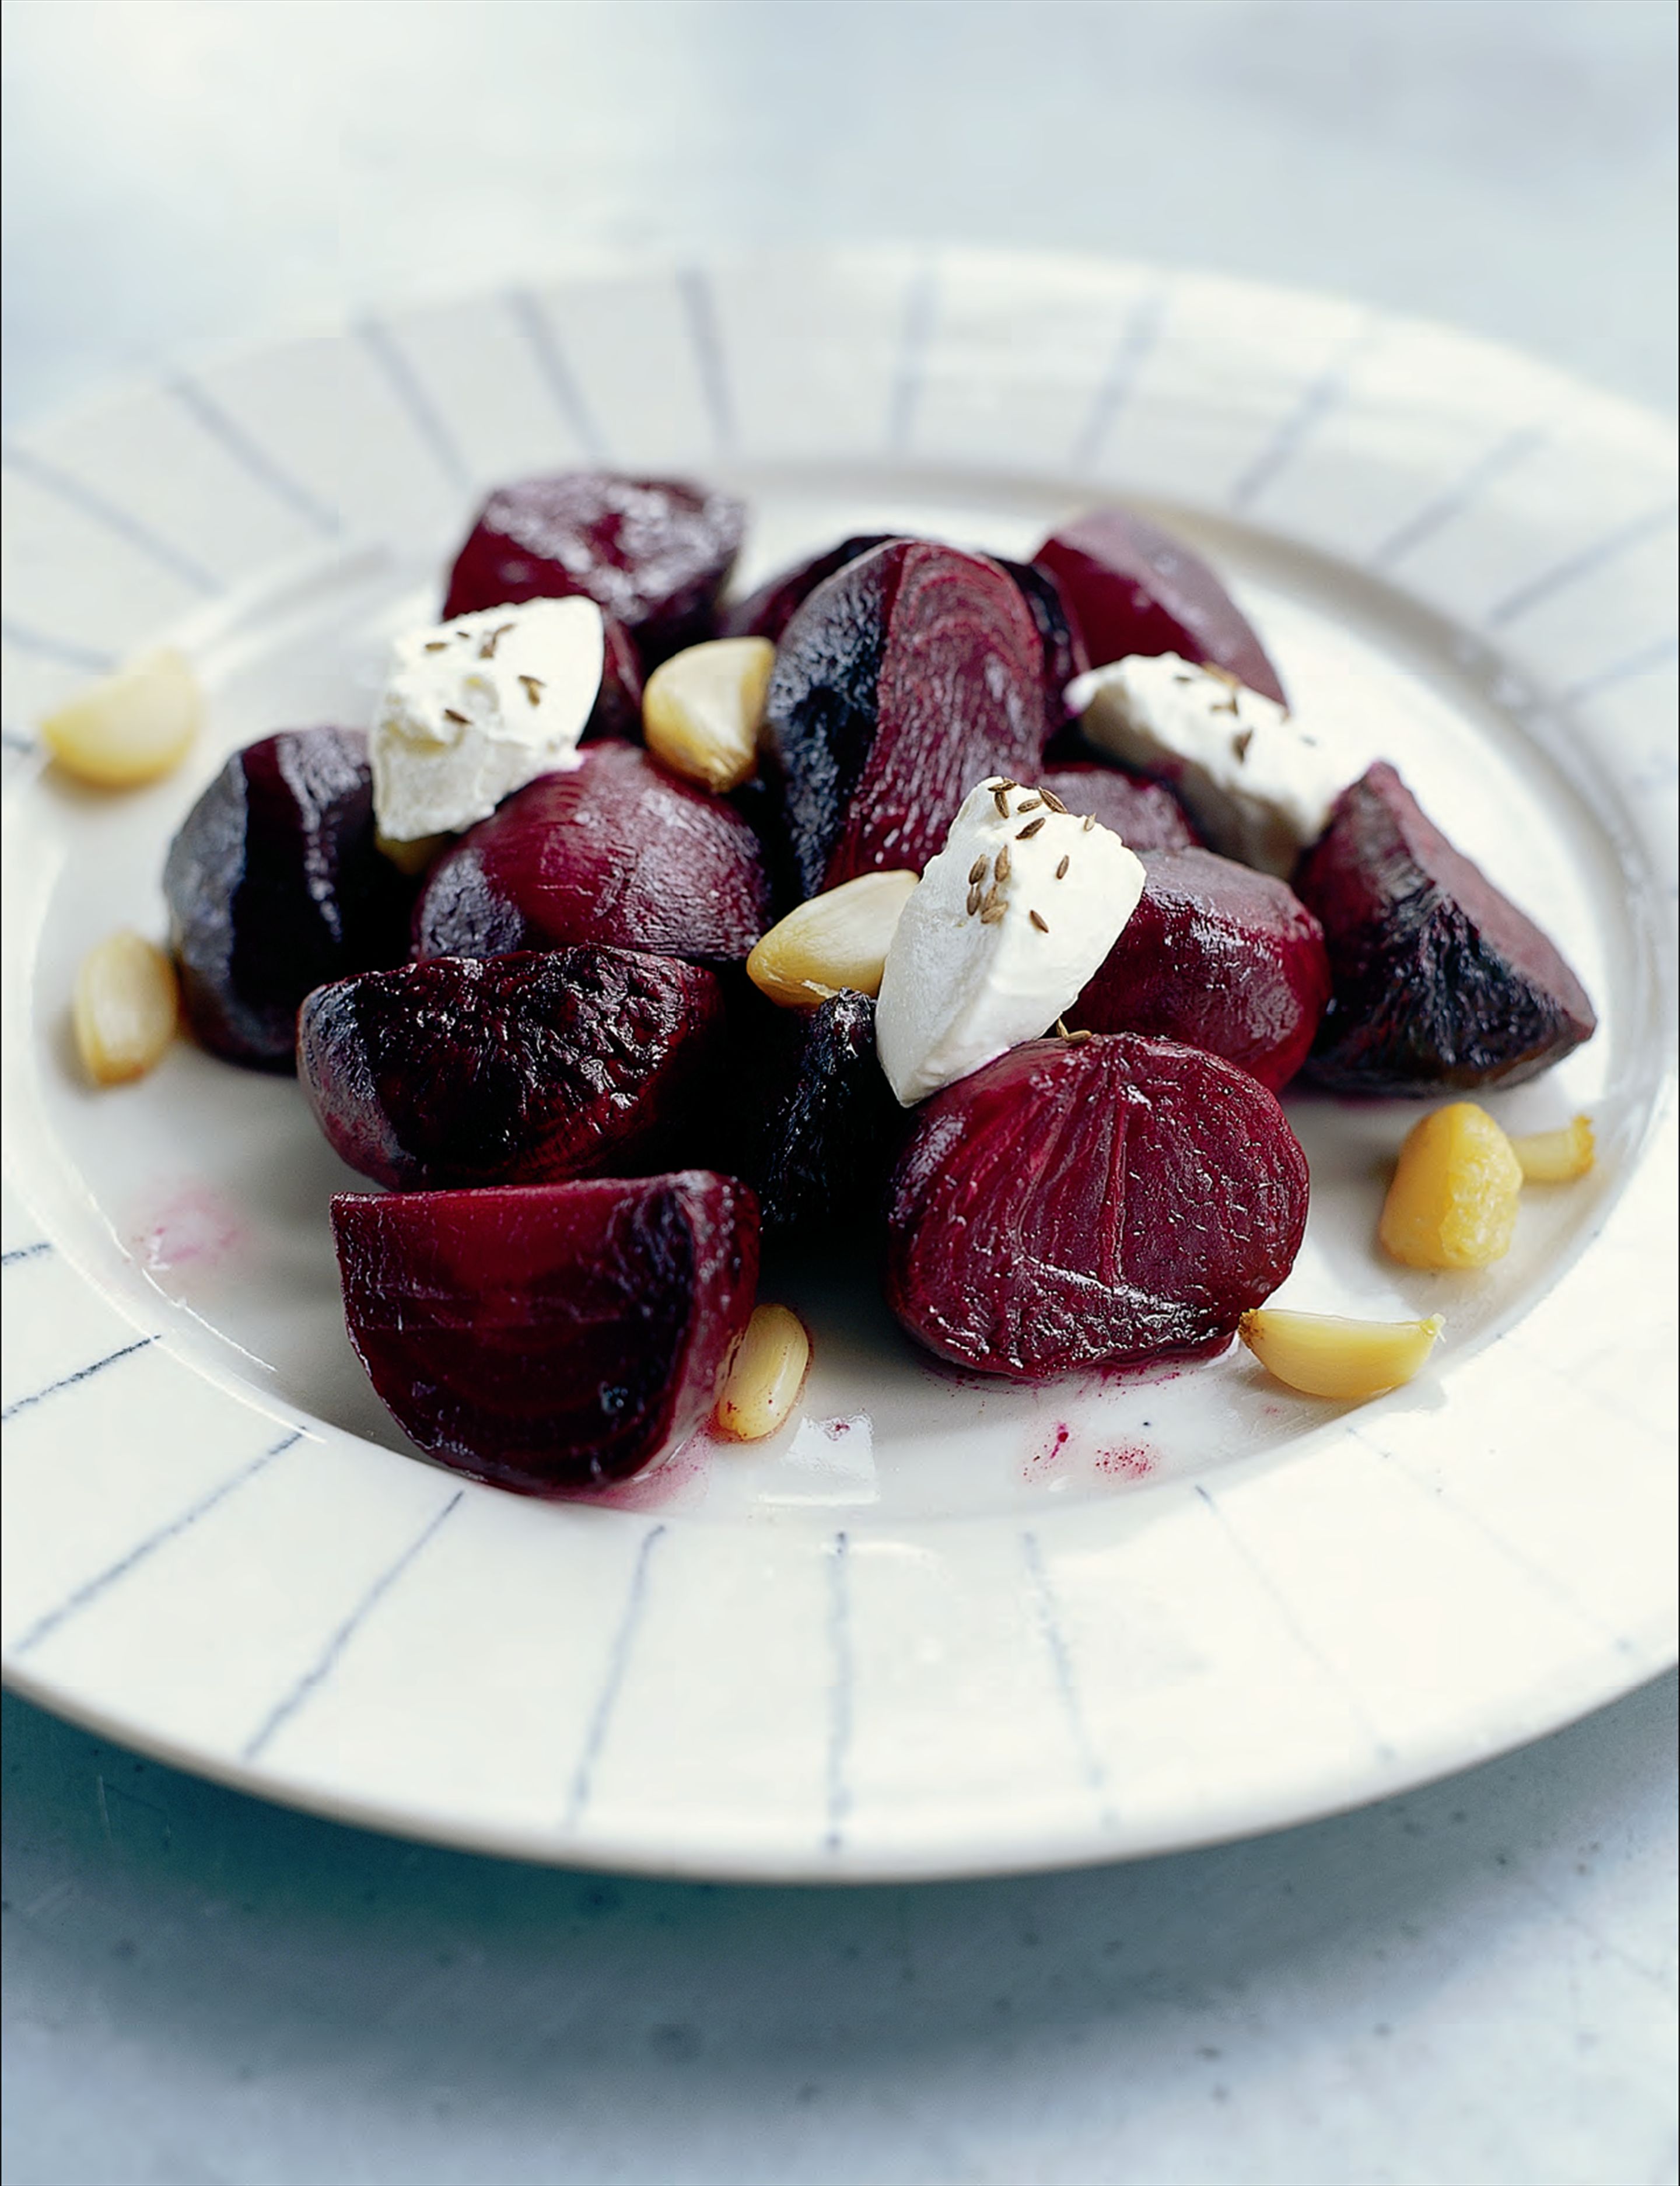 Roasted beetroot salad with garlic and labne